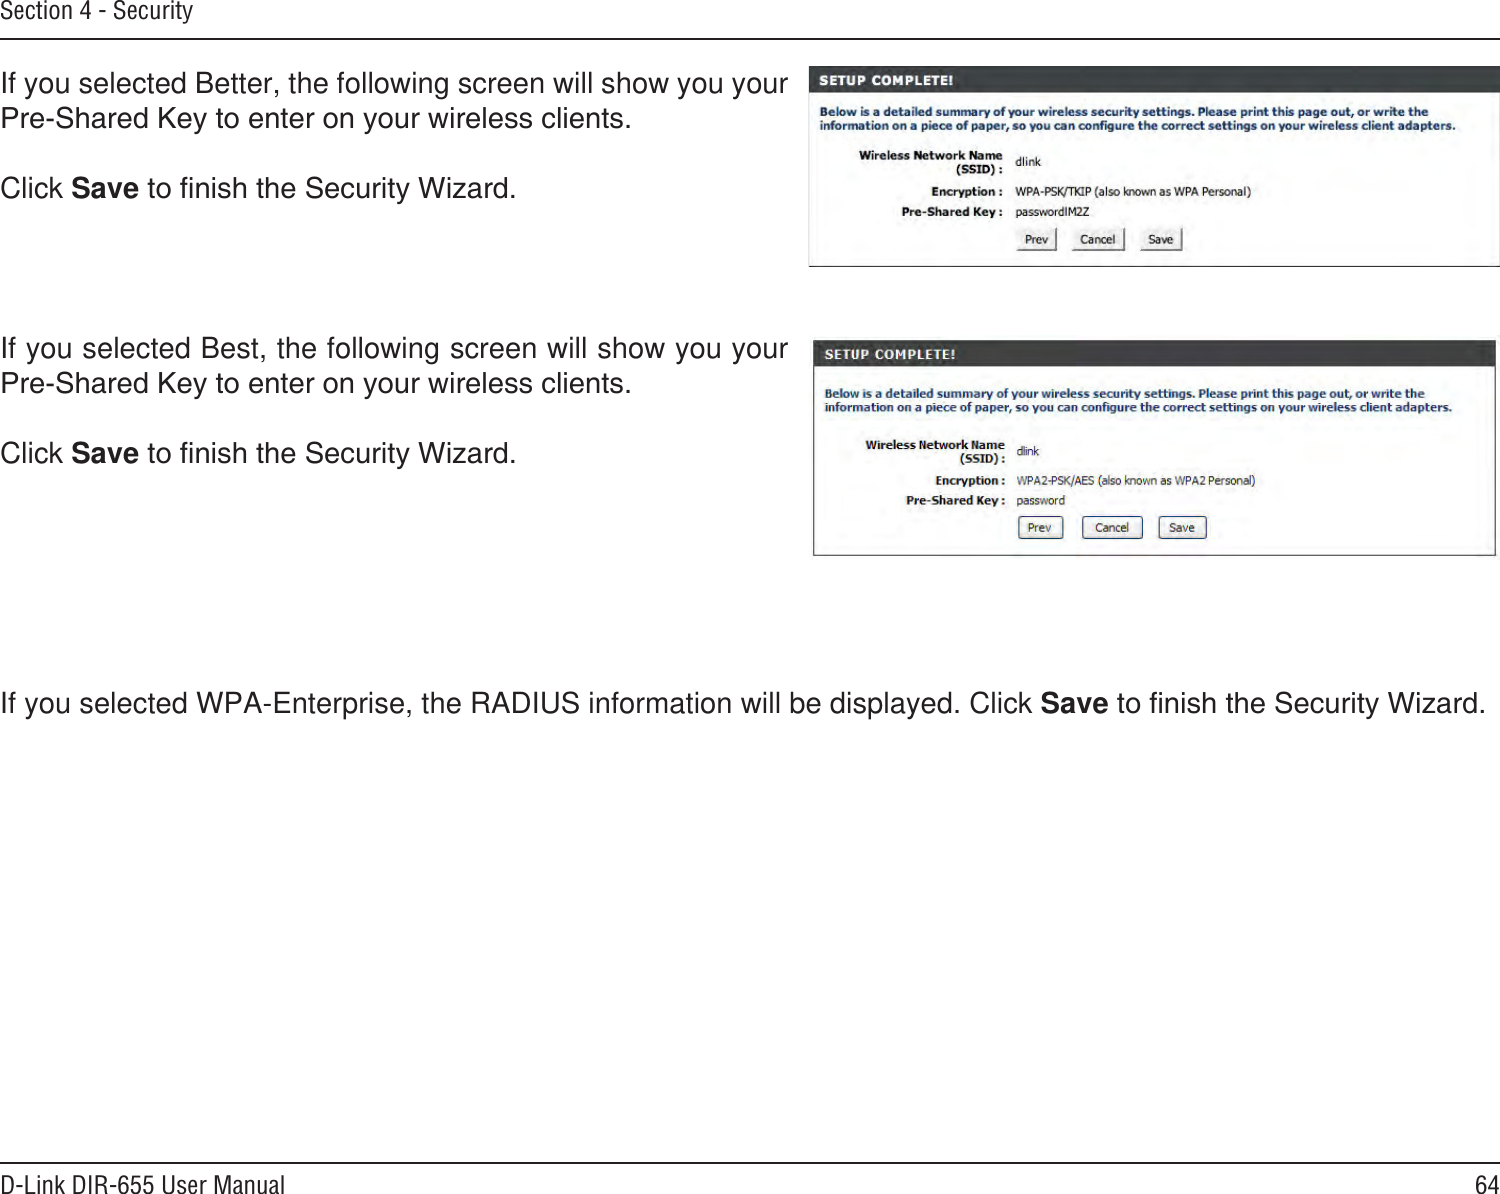 64D-Link DIR-655 User ManualSection 4 - SecurityIf you selected Better, the following screen will show you your Click SaveIf you selected Best, the following screen will show you your Click SaveIf you selected WPA-Enterprise, the RADIUS information will be displayed. Click Save